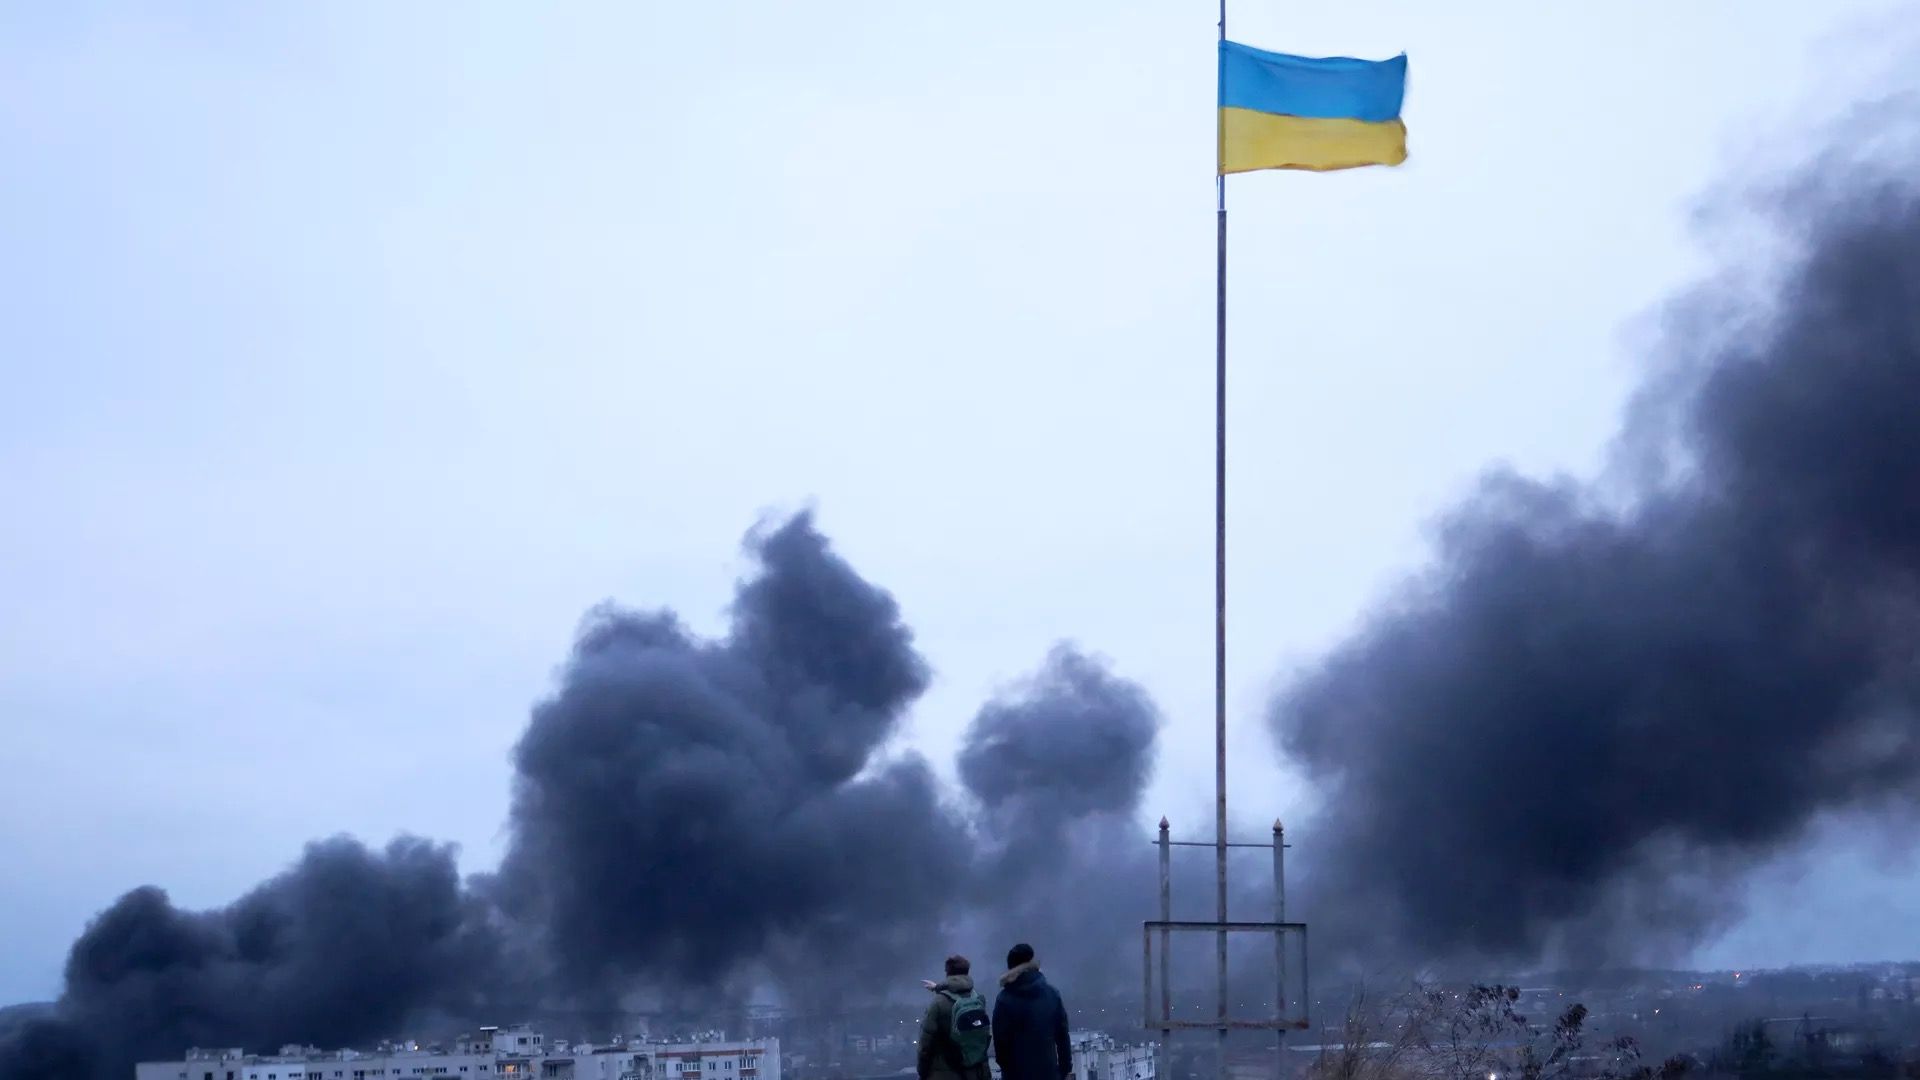 Onlookers view smoke from an airstrike as they stand before Ukraine's flag.